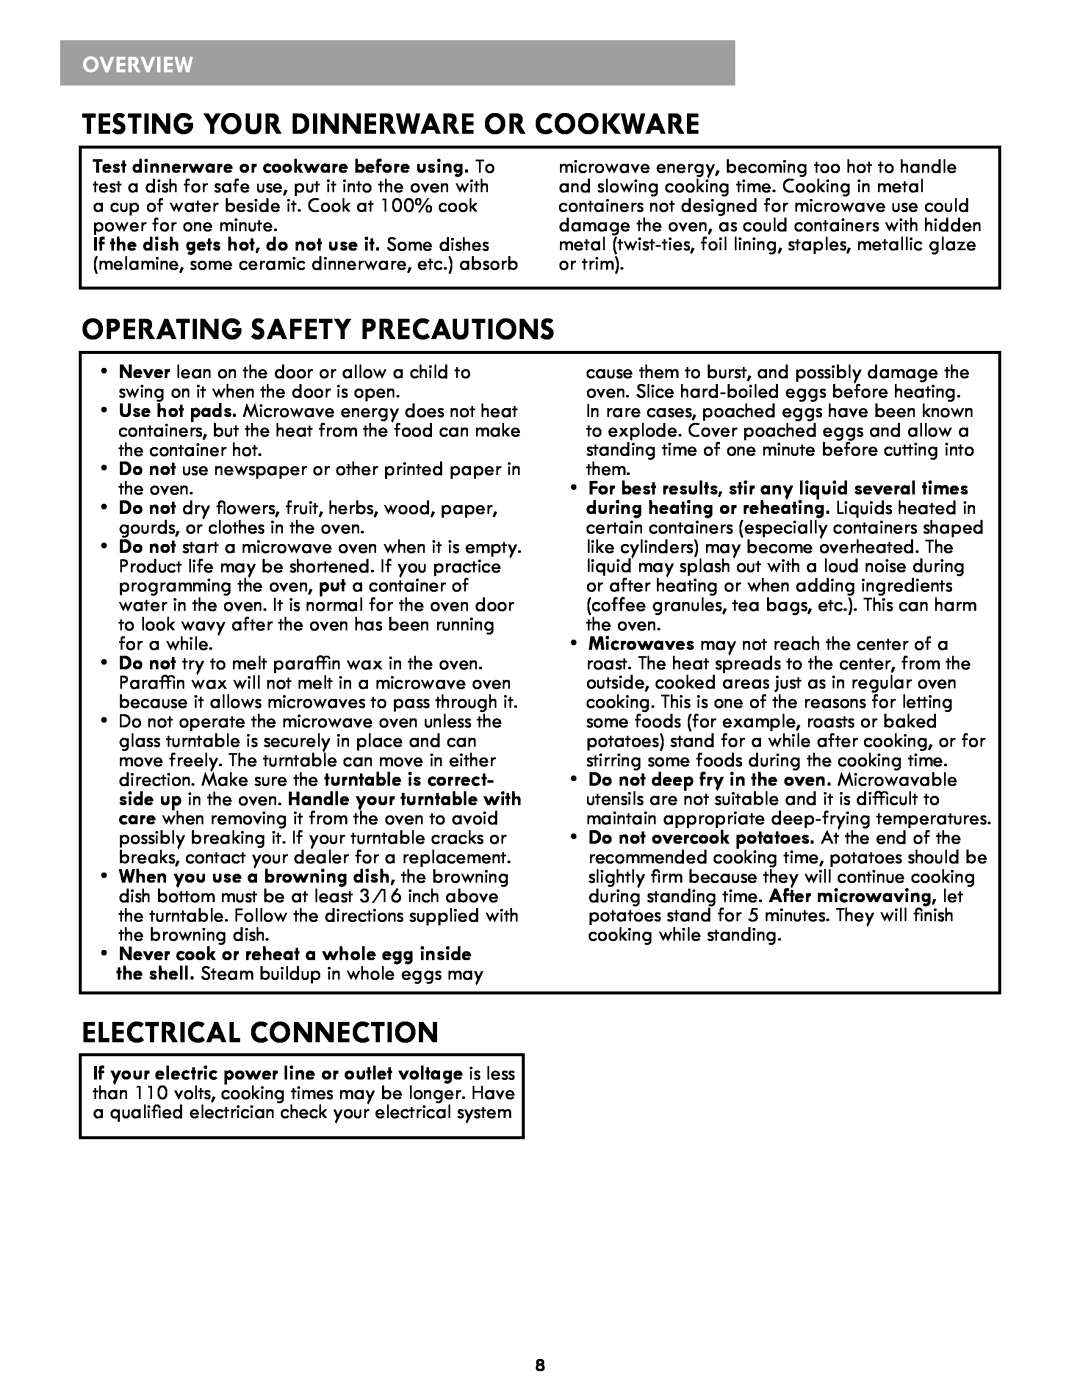 Kenmore 721.86012 manual Testing Your Dinnerware Or Cookware, Operating Safety Precautions, Electrical Connection, Overview 